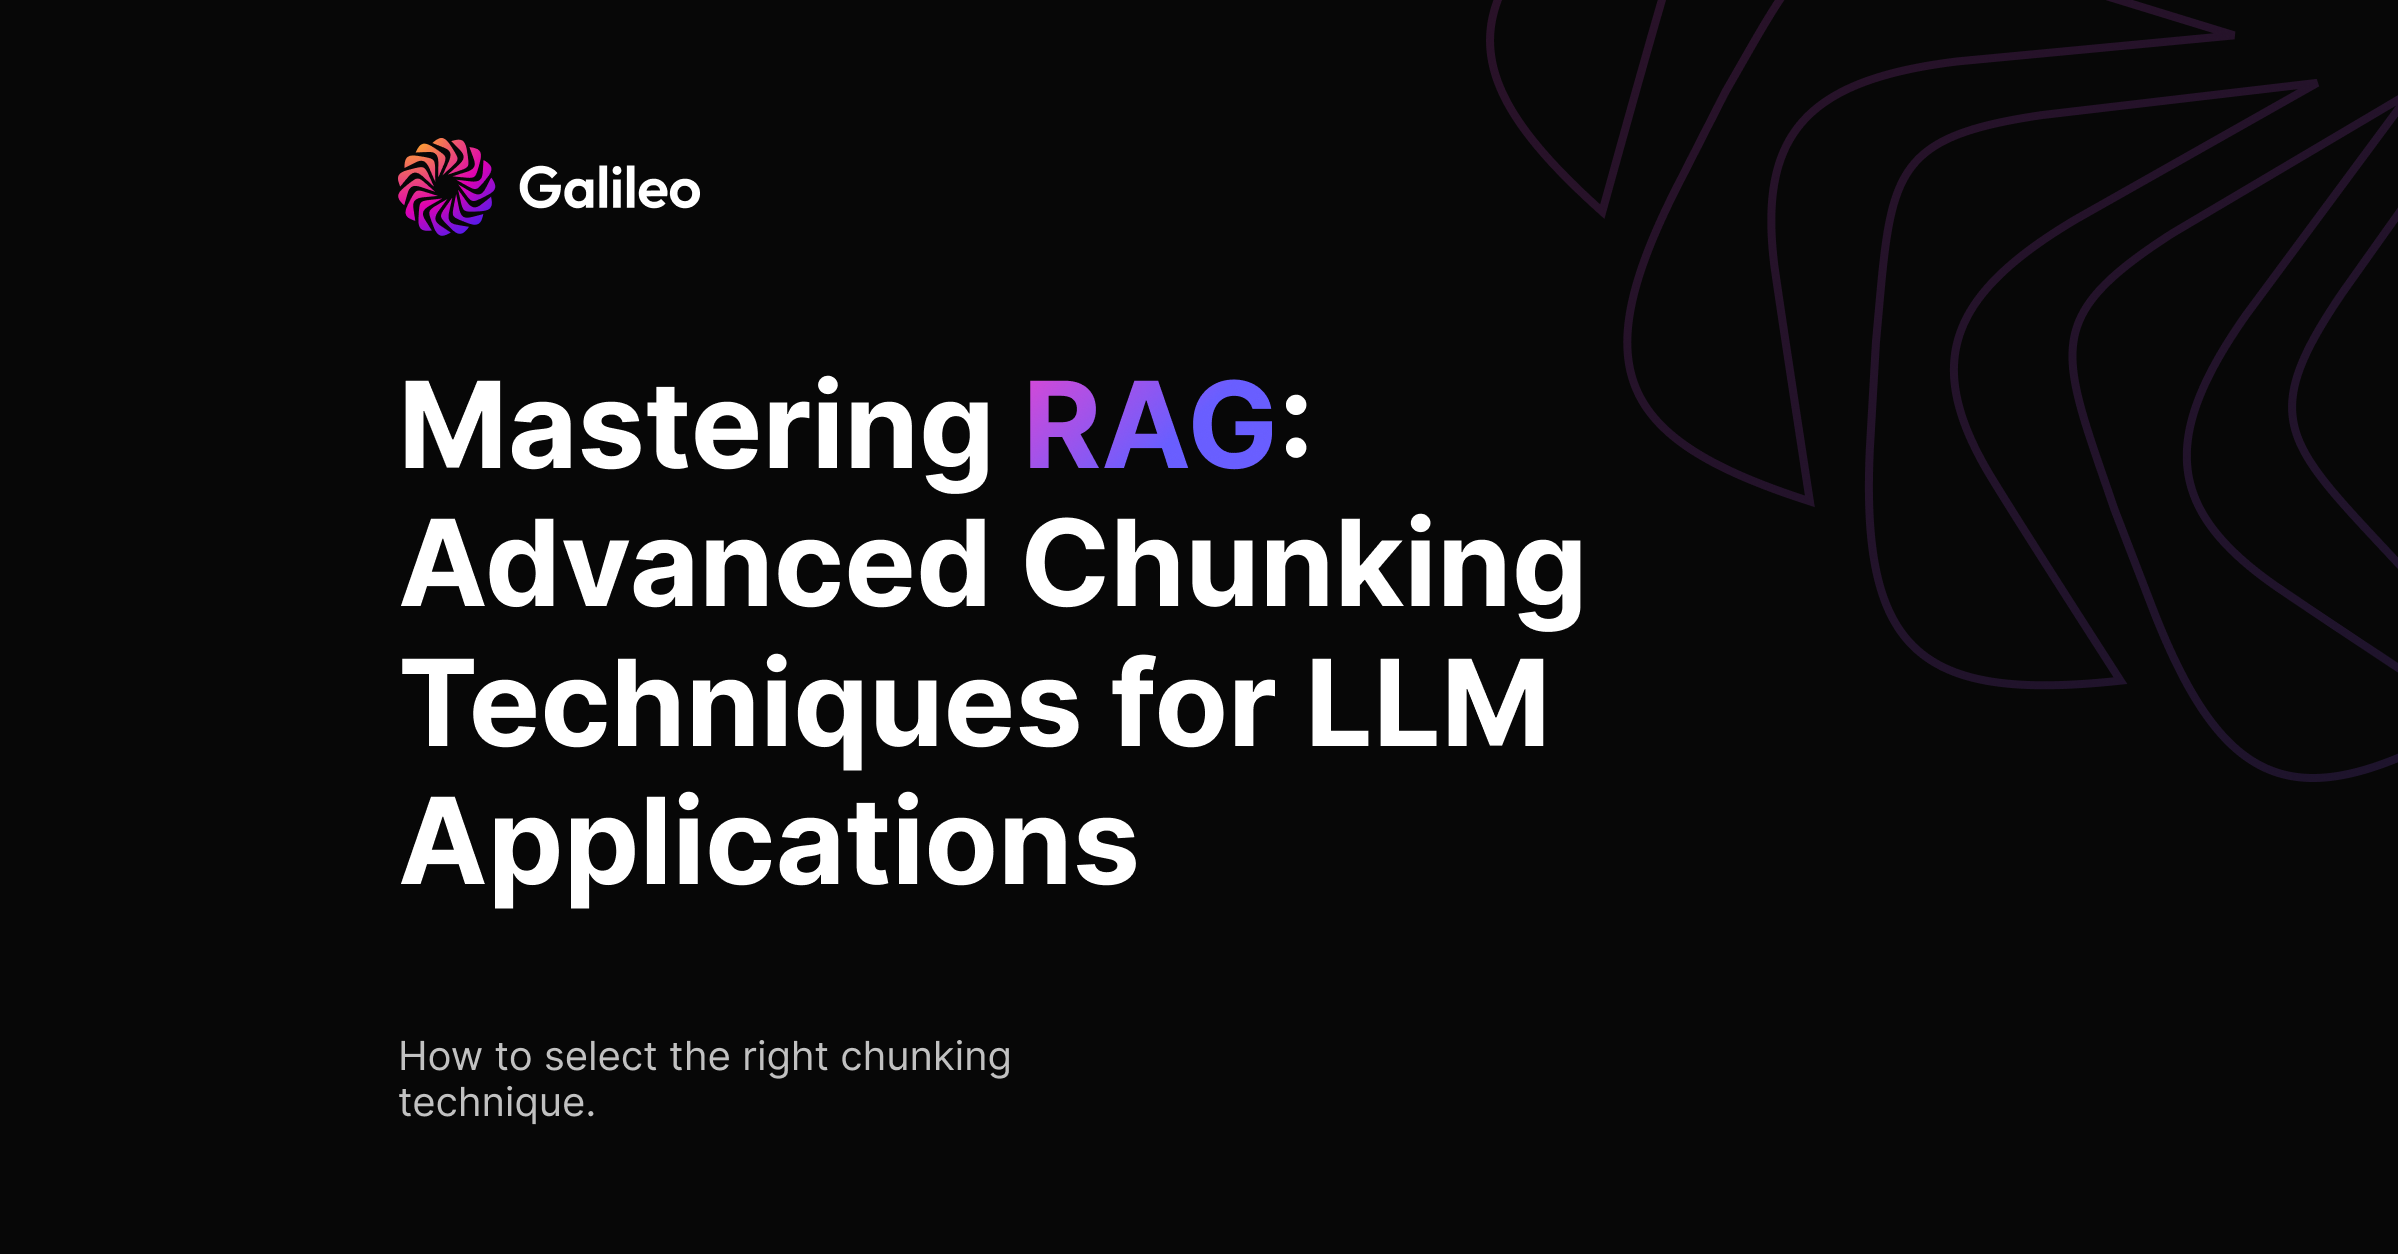 Mastering RAG: Advanced Chunking Techniques for LLM Applications